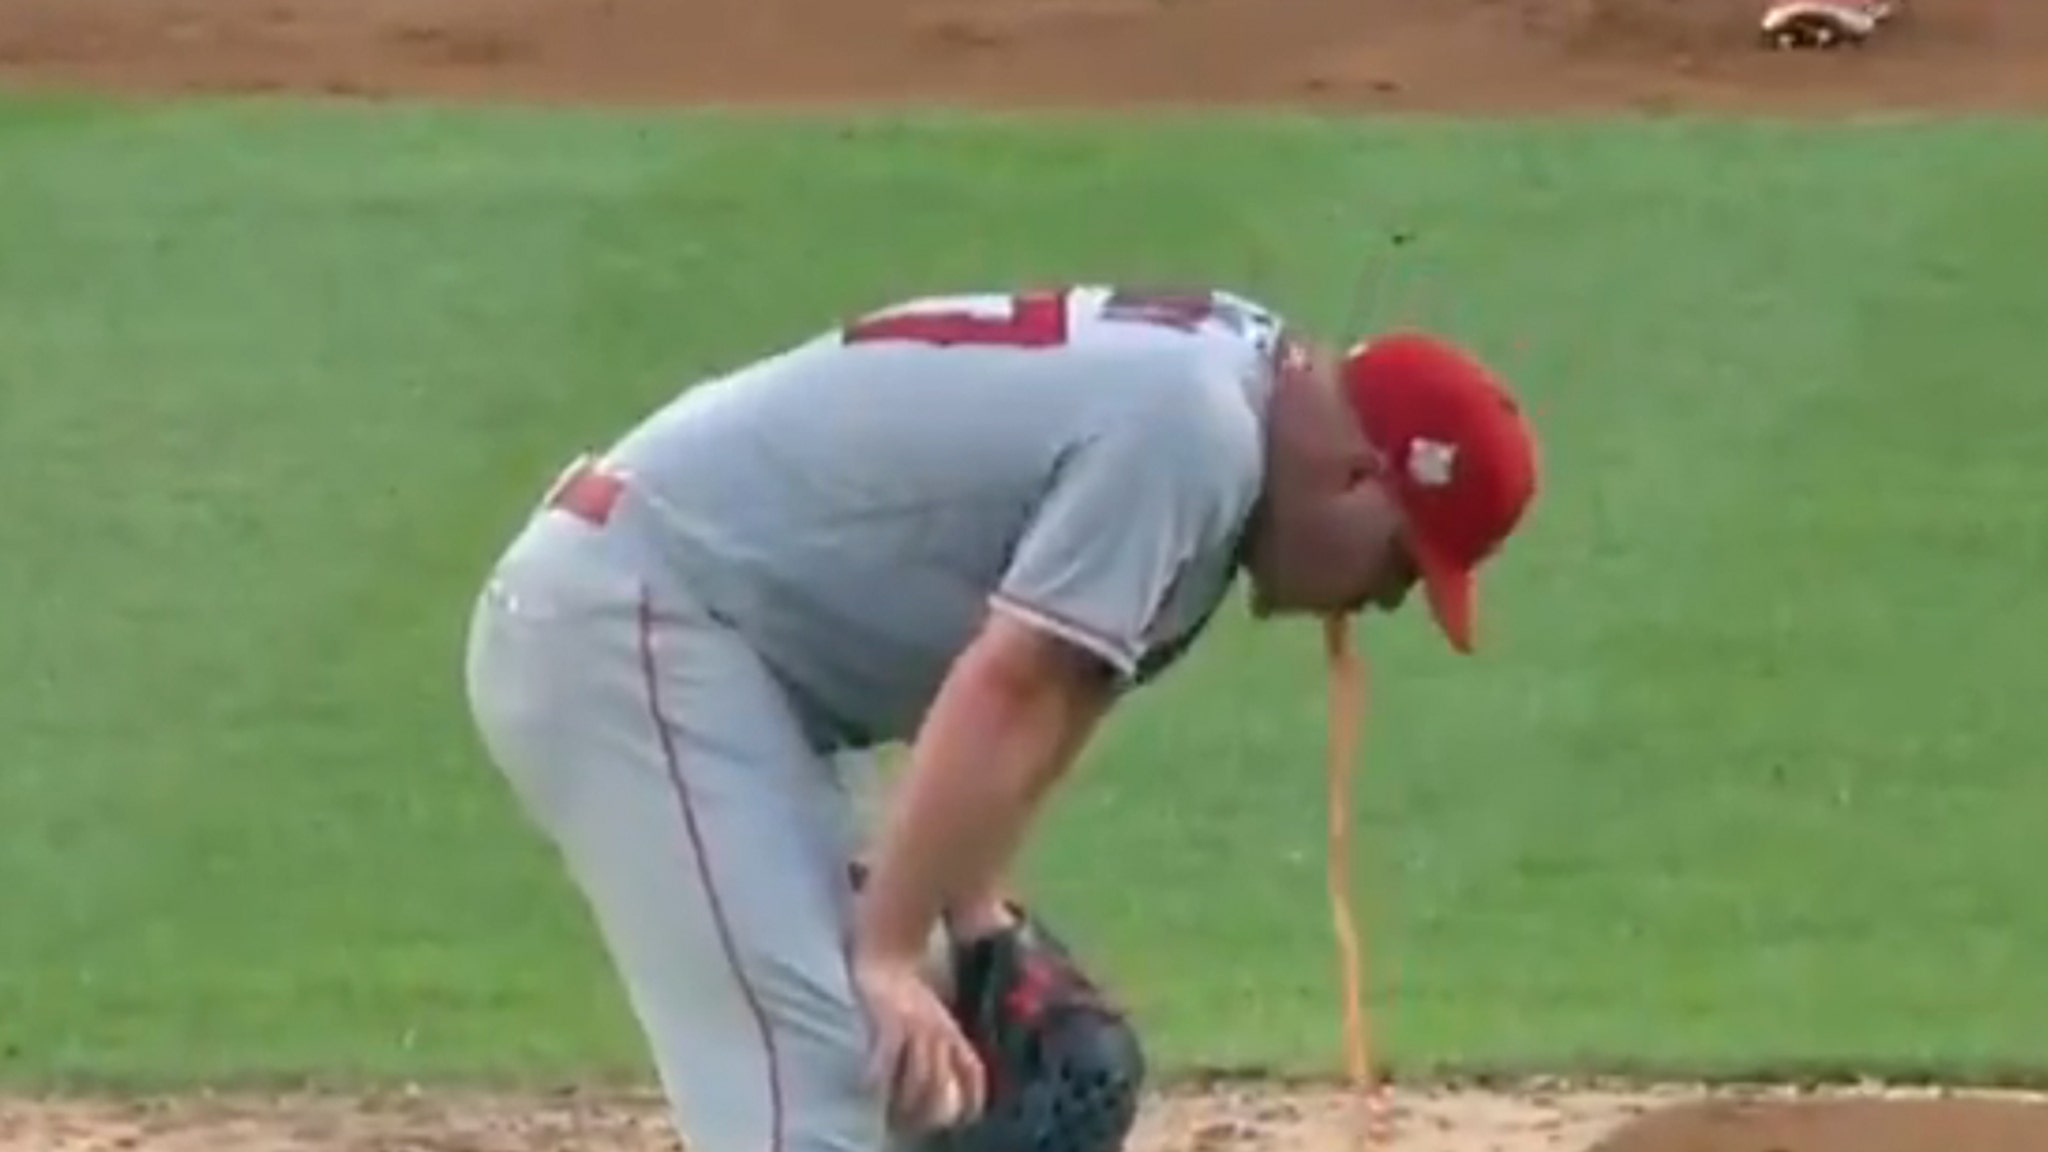 Angels' Dylan Bundy Throws Up All Over Yankee Stadium Mound, Pulled From Game